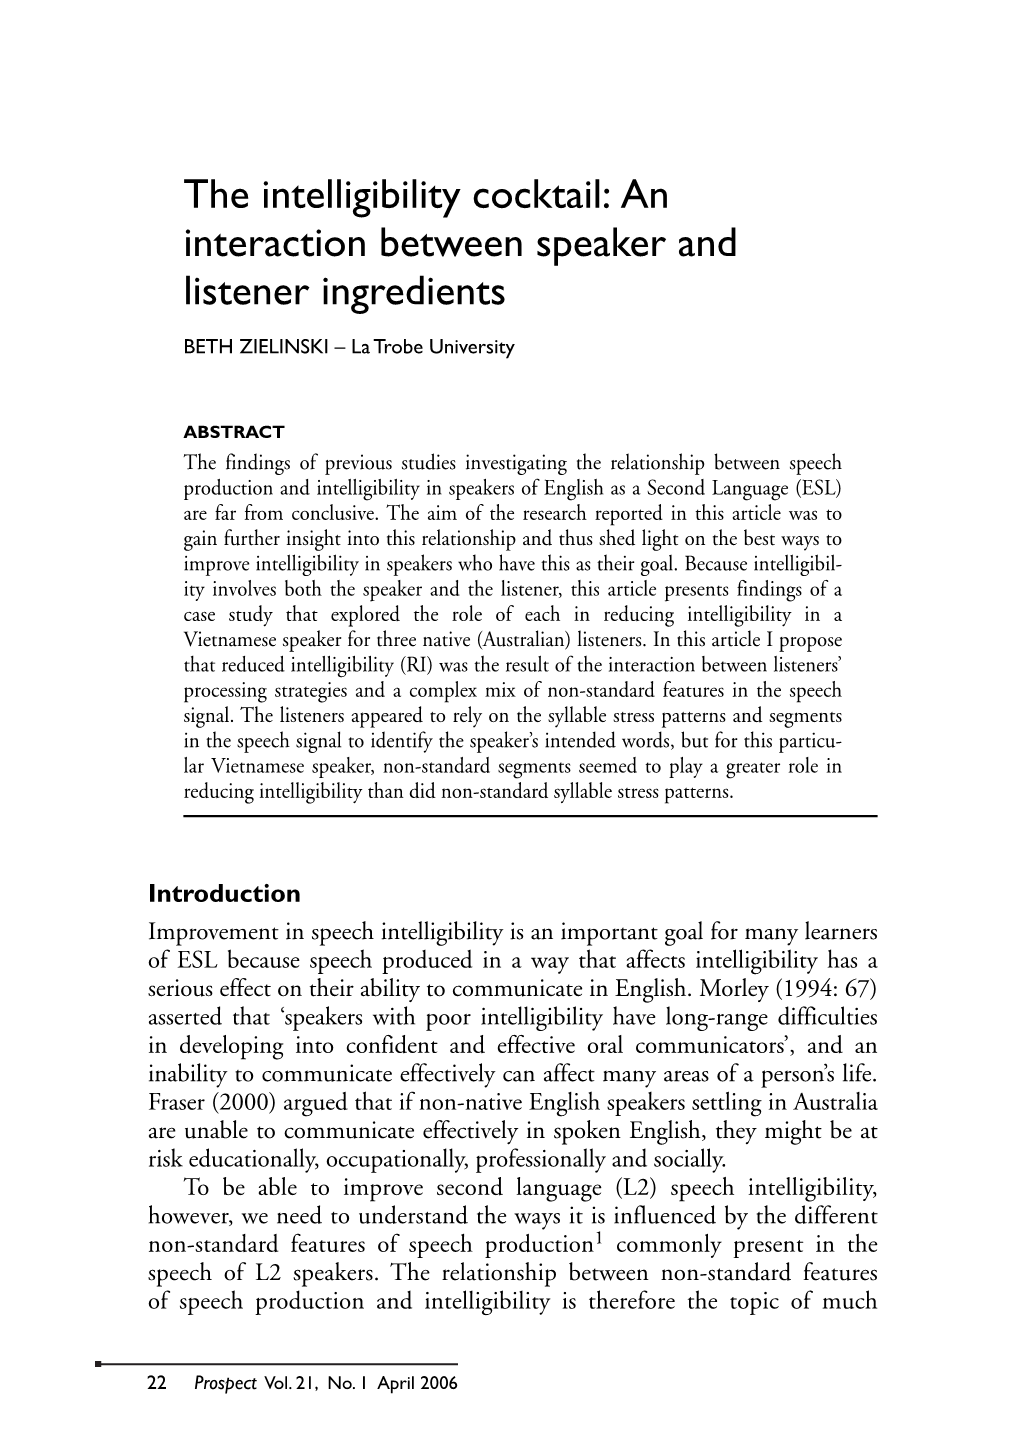 The Intelligibility Cocktail: an Interaction Between Speaker and Listener Ingredients